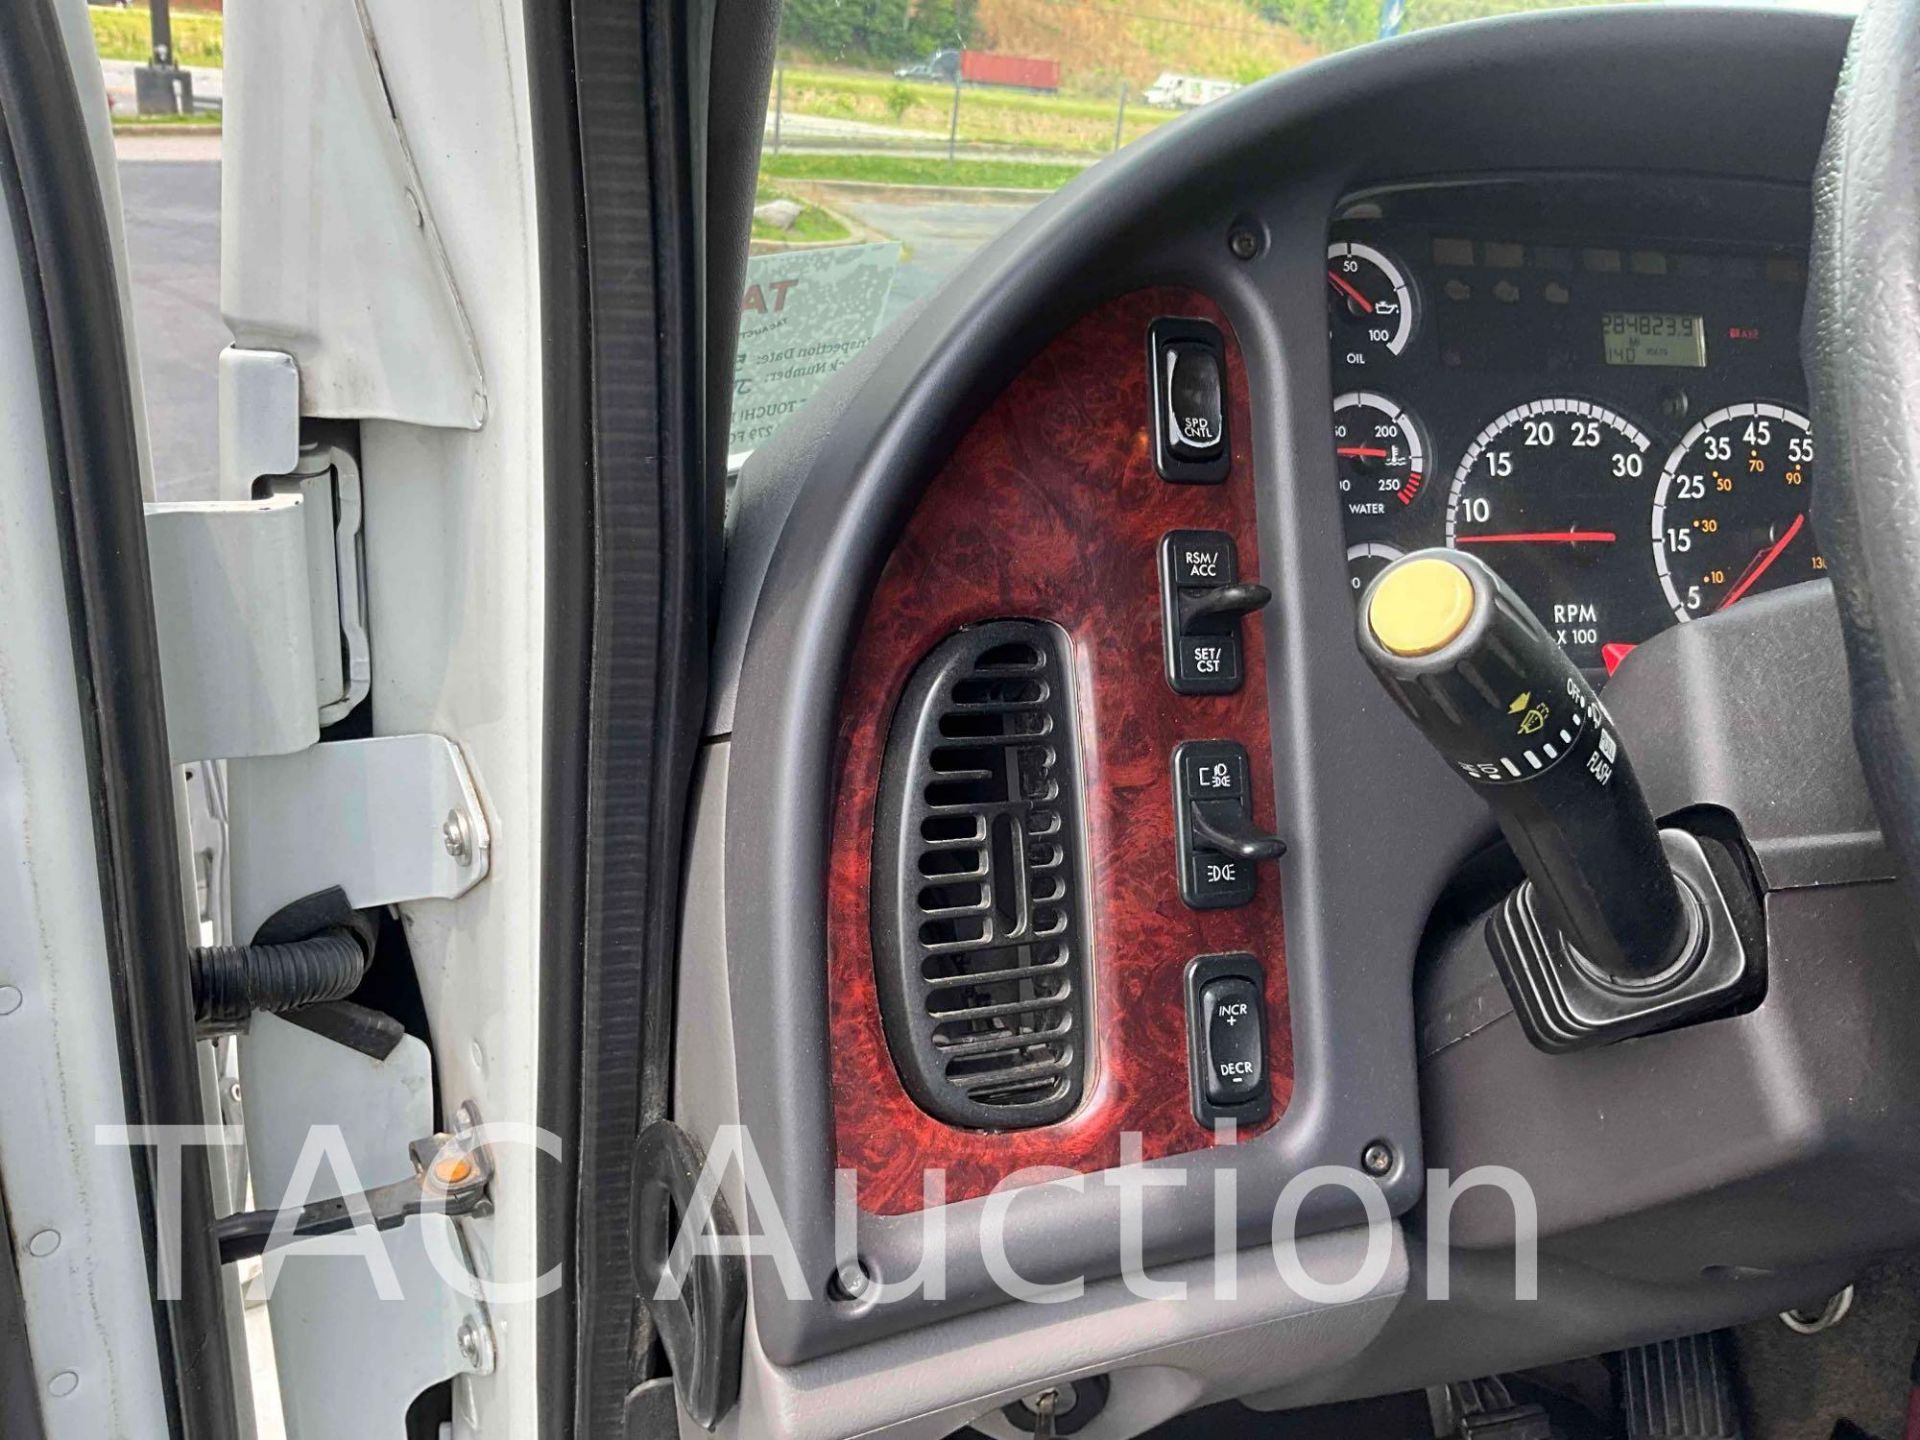 2014 Freightliner M2 Crew Cab Rollback Truck - Image 31 of 71